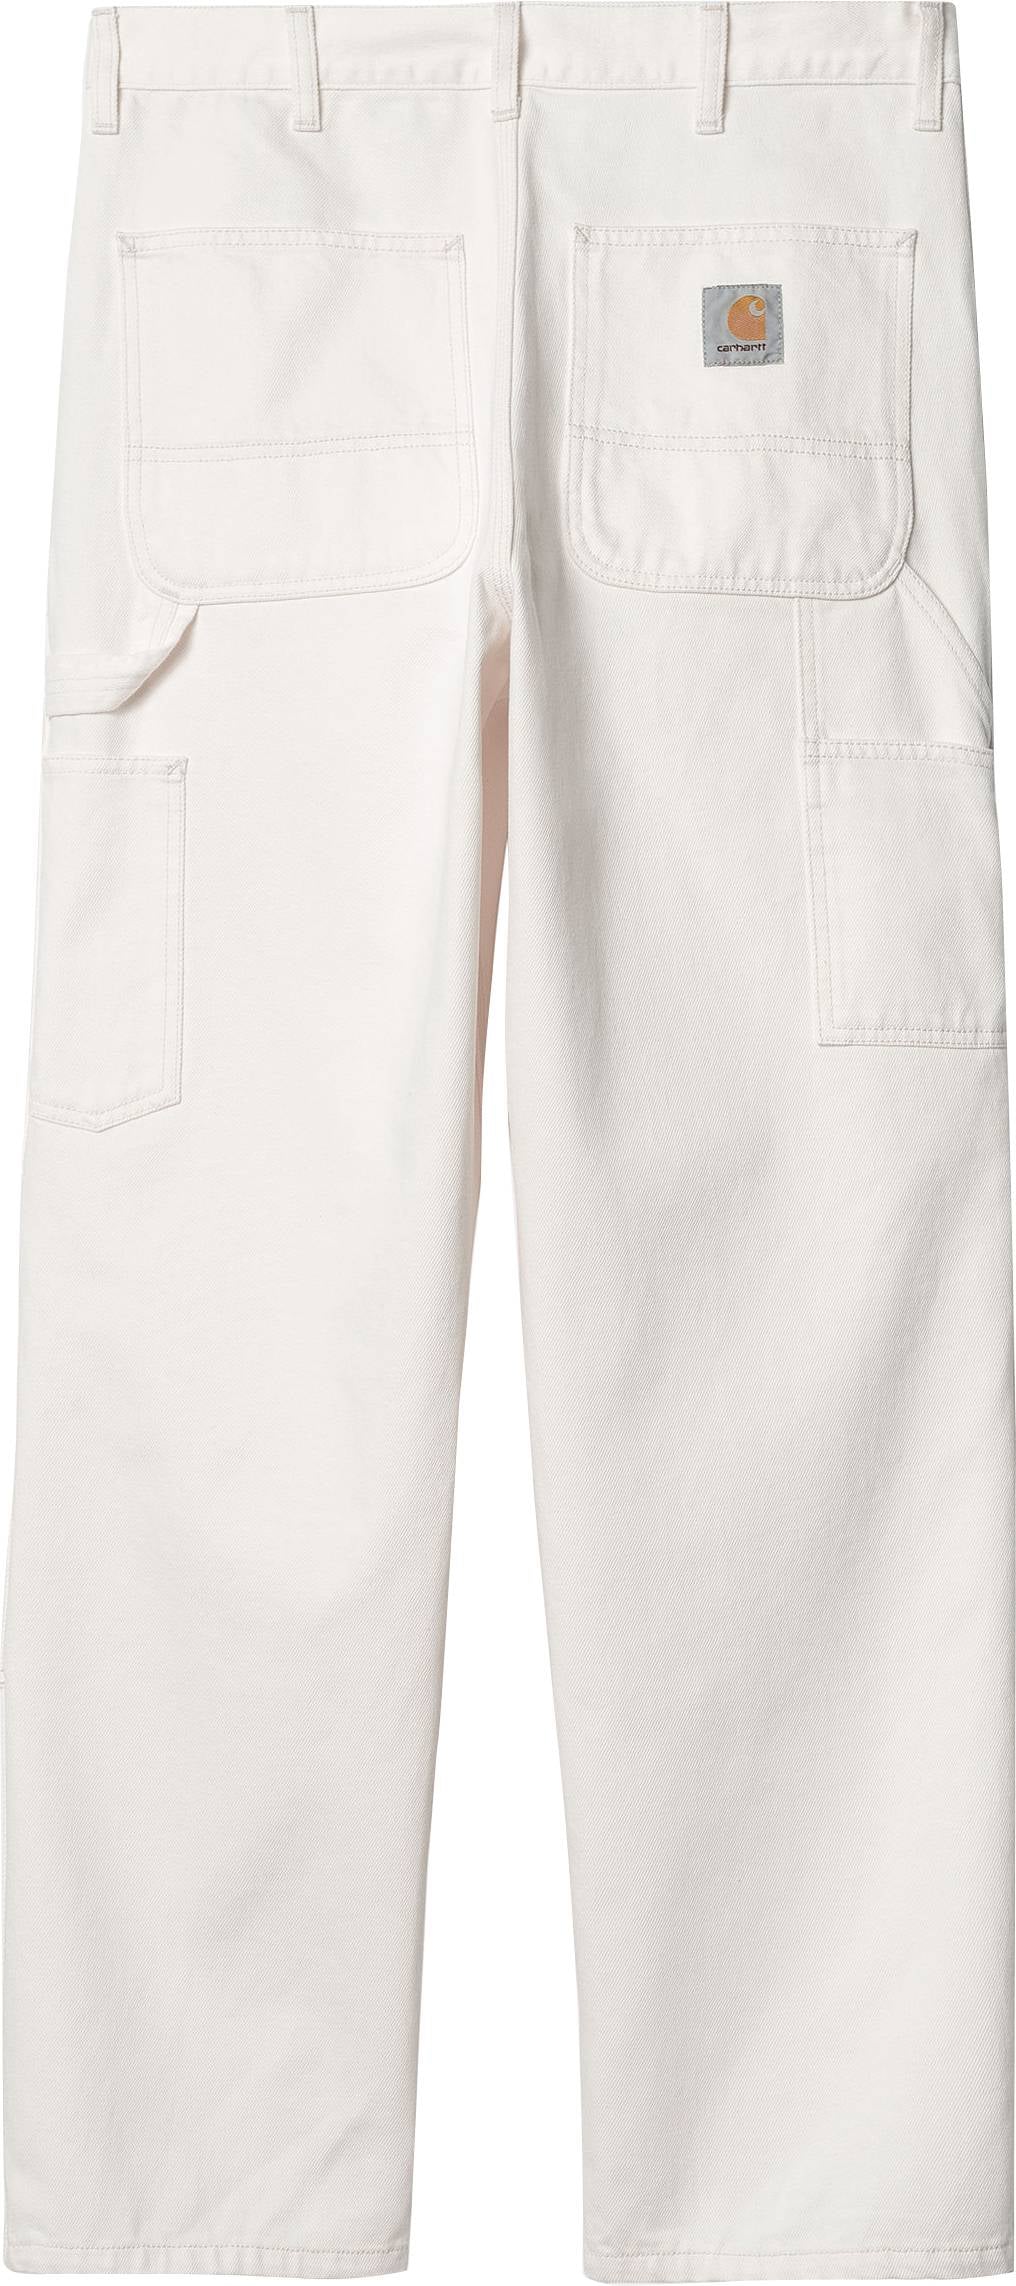  Carhartt Wip Jeans Double Knee Pant White Rinsed Bianco Uomo - 2